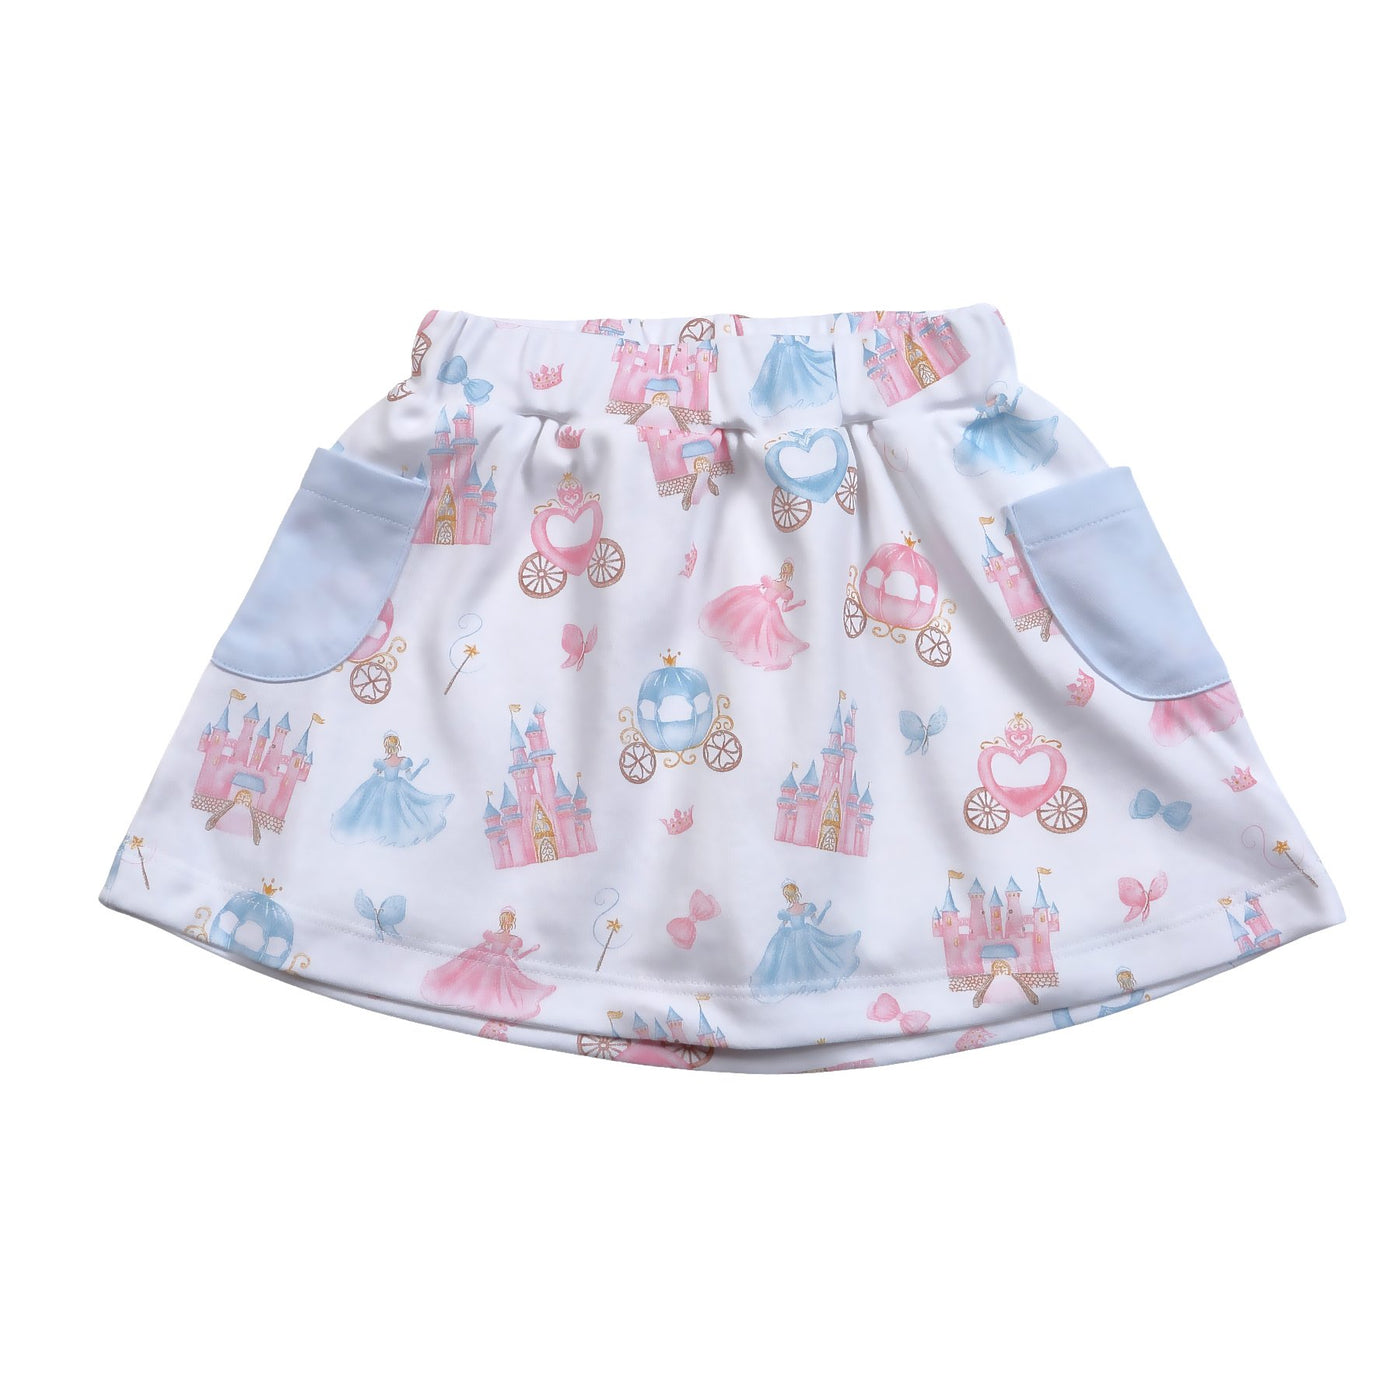 PRINCESS AND CASTLES PIMA SKIRT WITH SHORTS - Breckenridge Baby